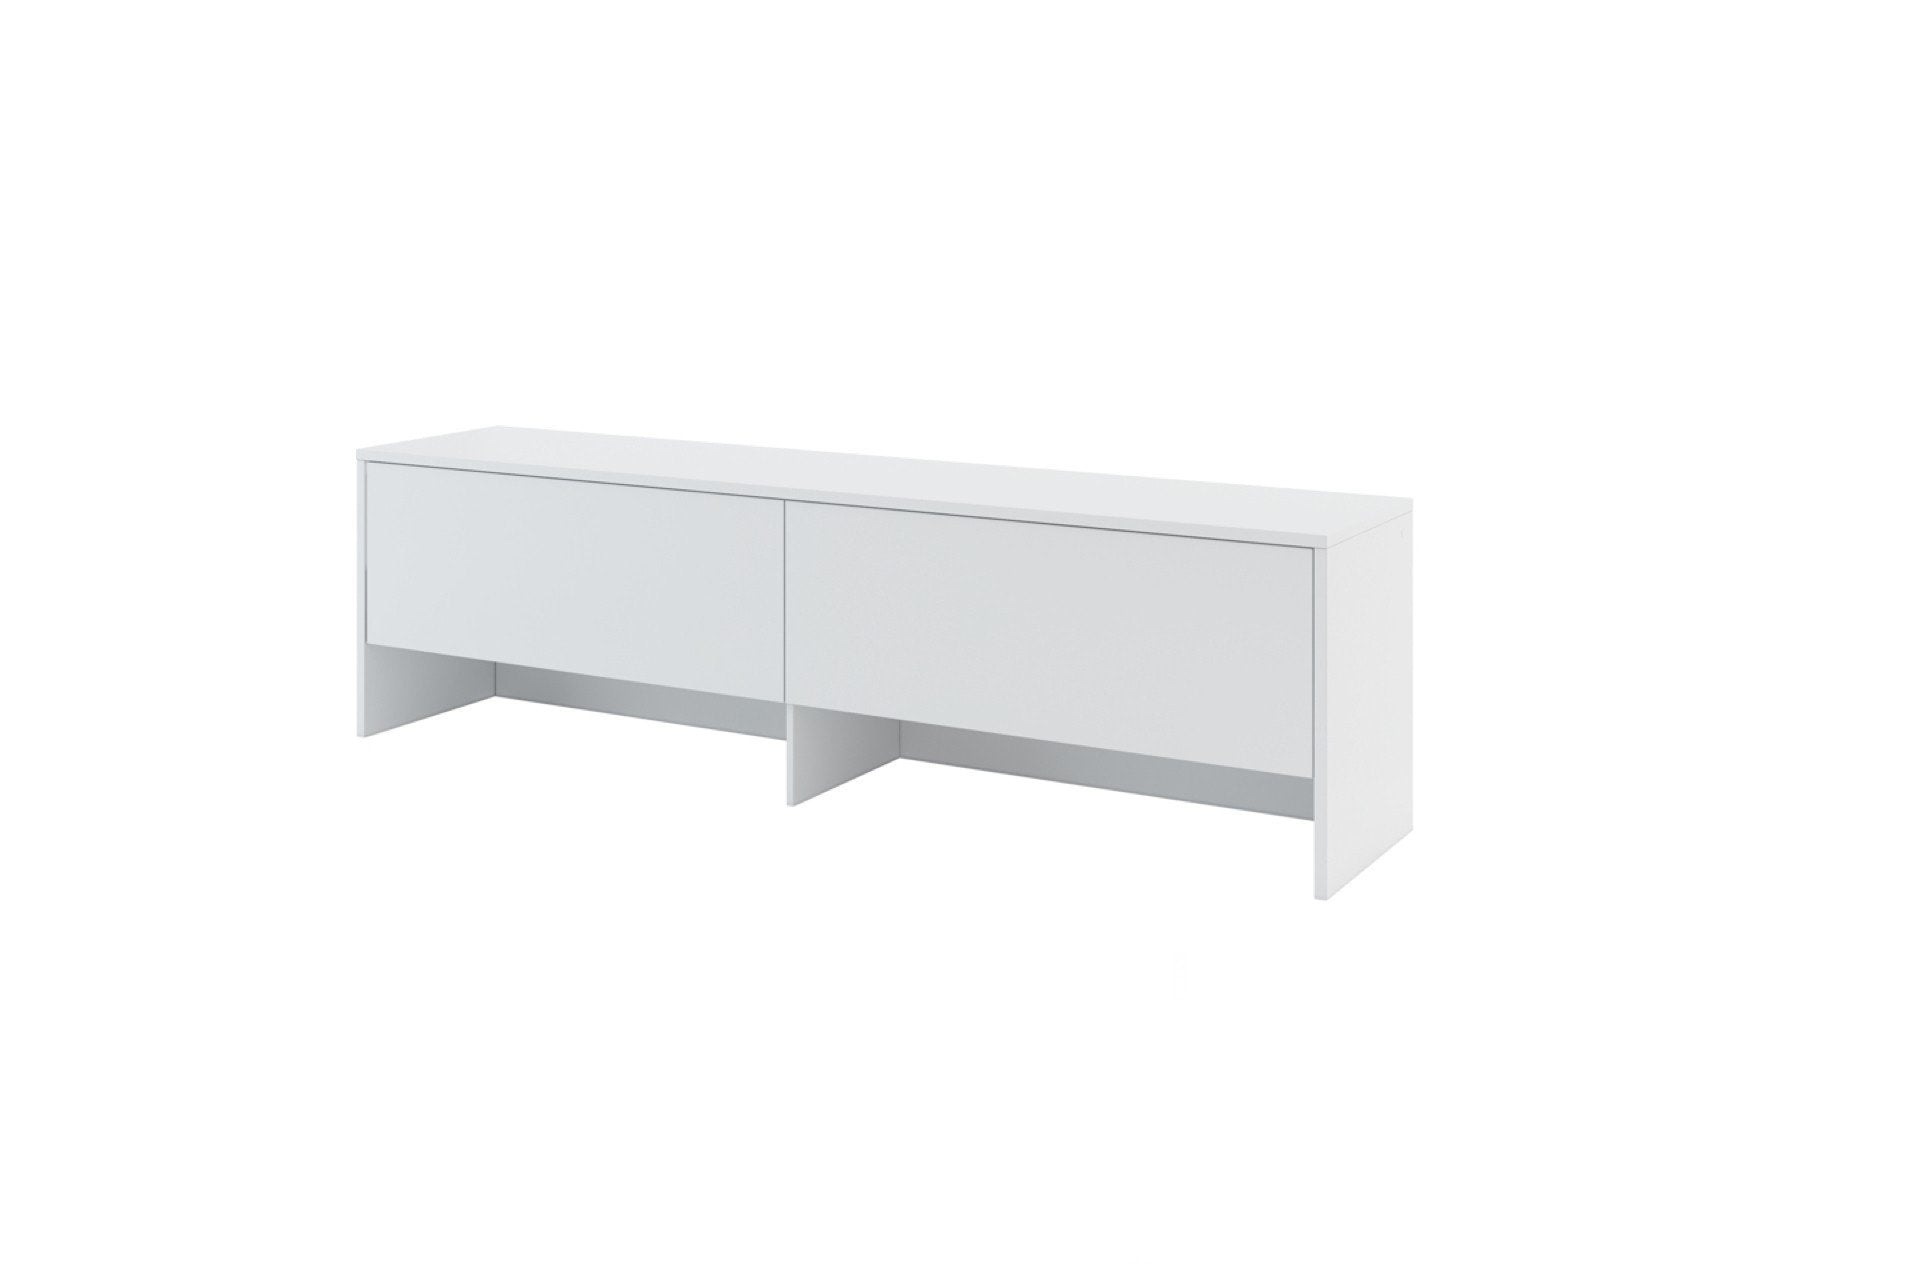 BC-09 Over Bed Unit for Horizontal Wall Bed Concept 140cm White Matt Wall Bed with Storage Unit 